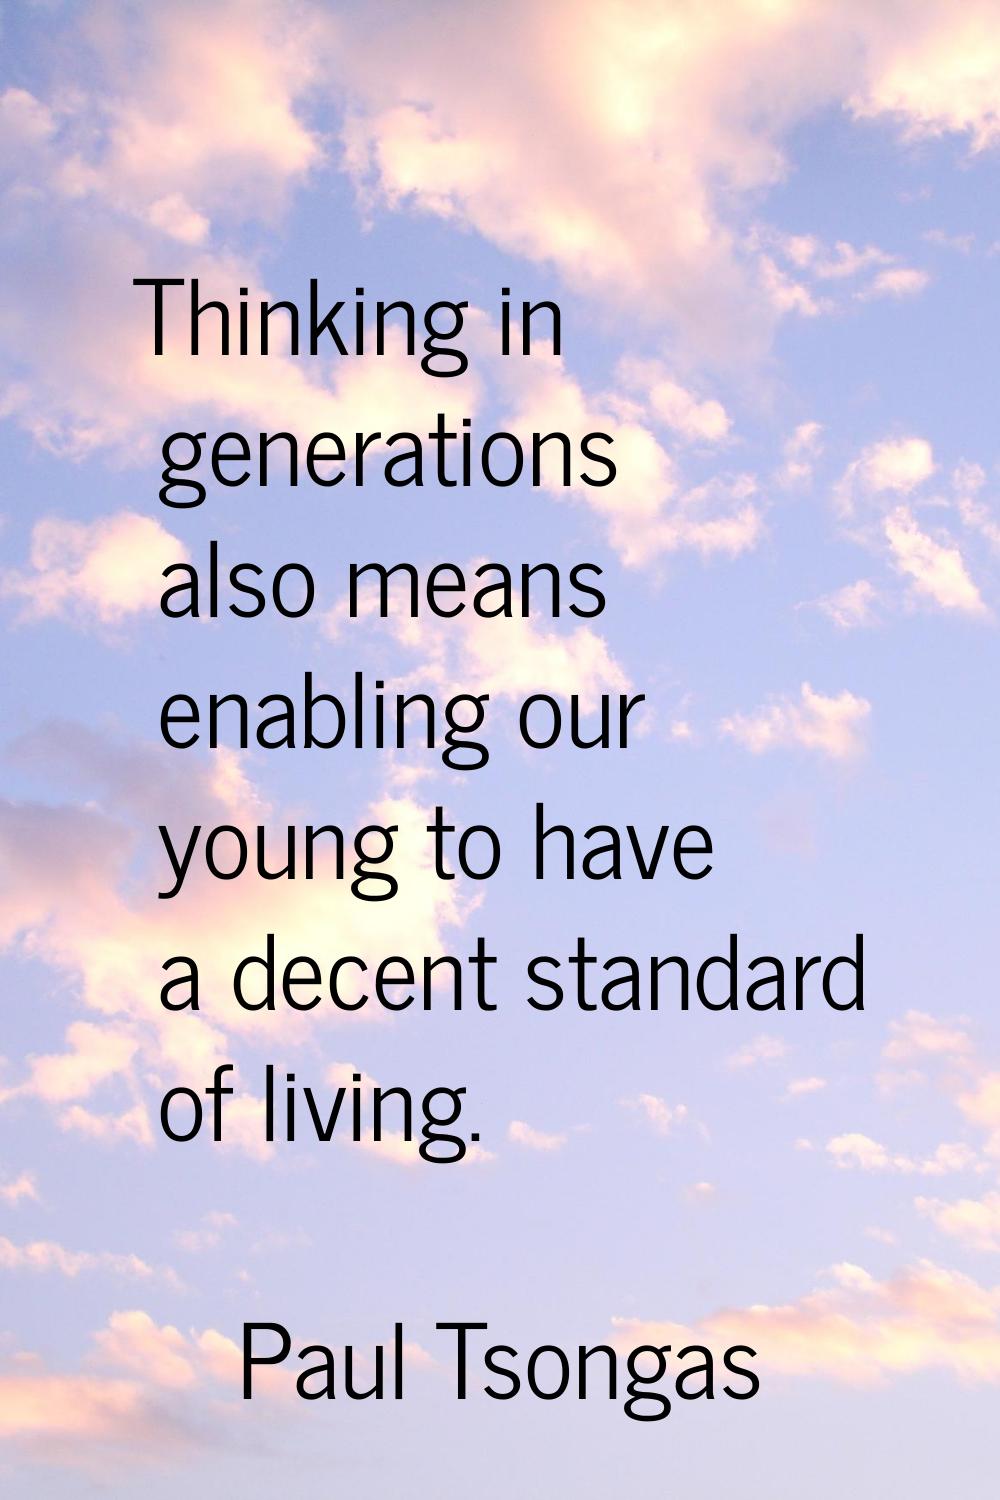 Thinking in generations also means enabling our young to have a decent standard of living.